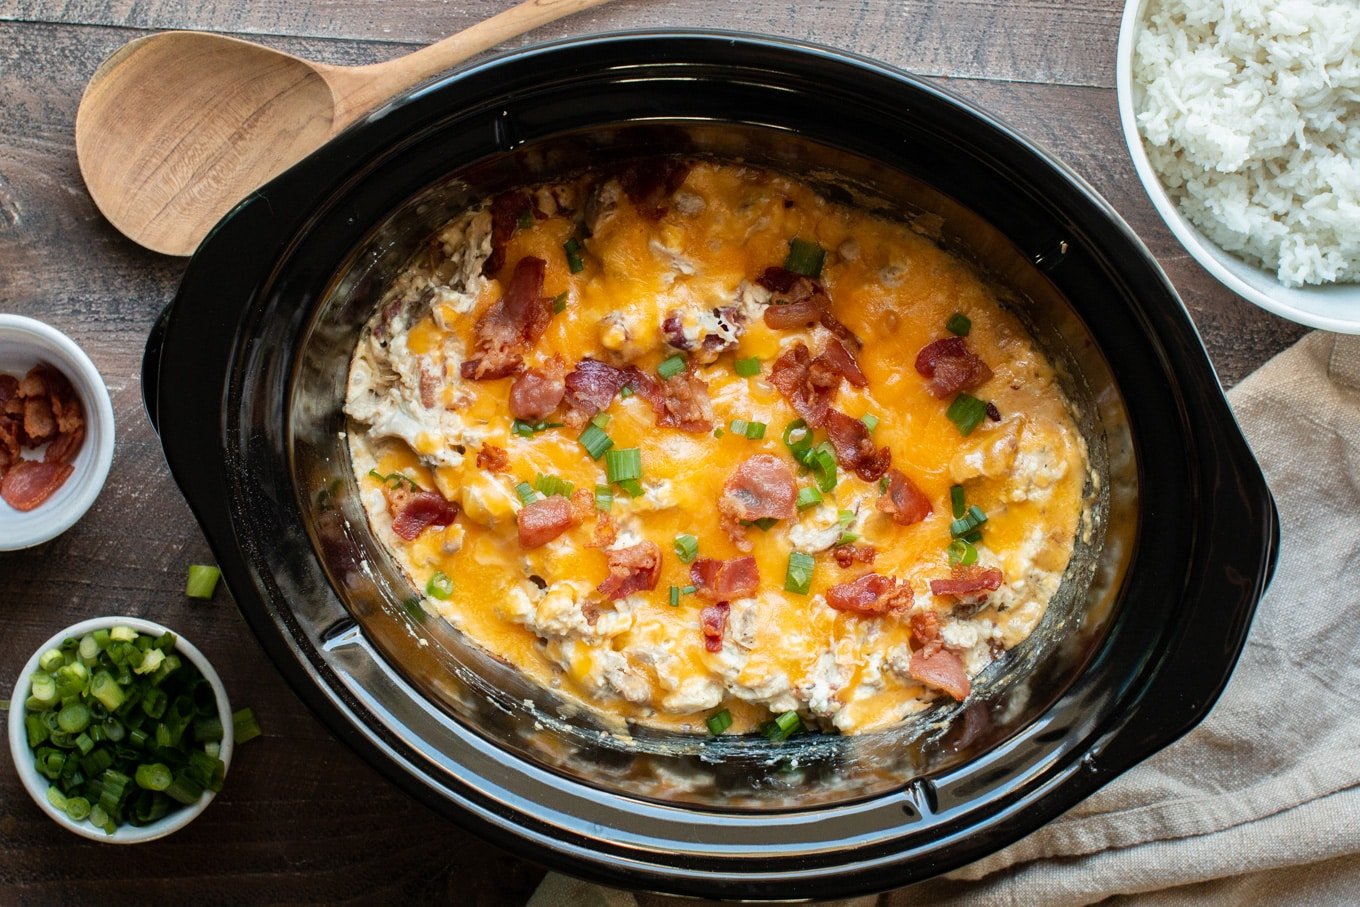 Finished crack chicken in slow cooker with bacon, cheese and green onion on top.